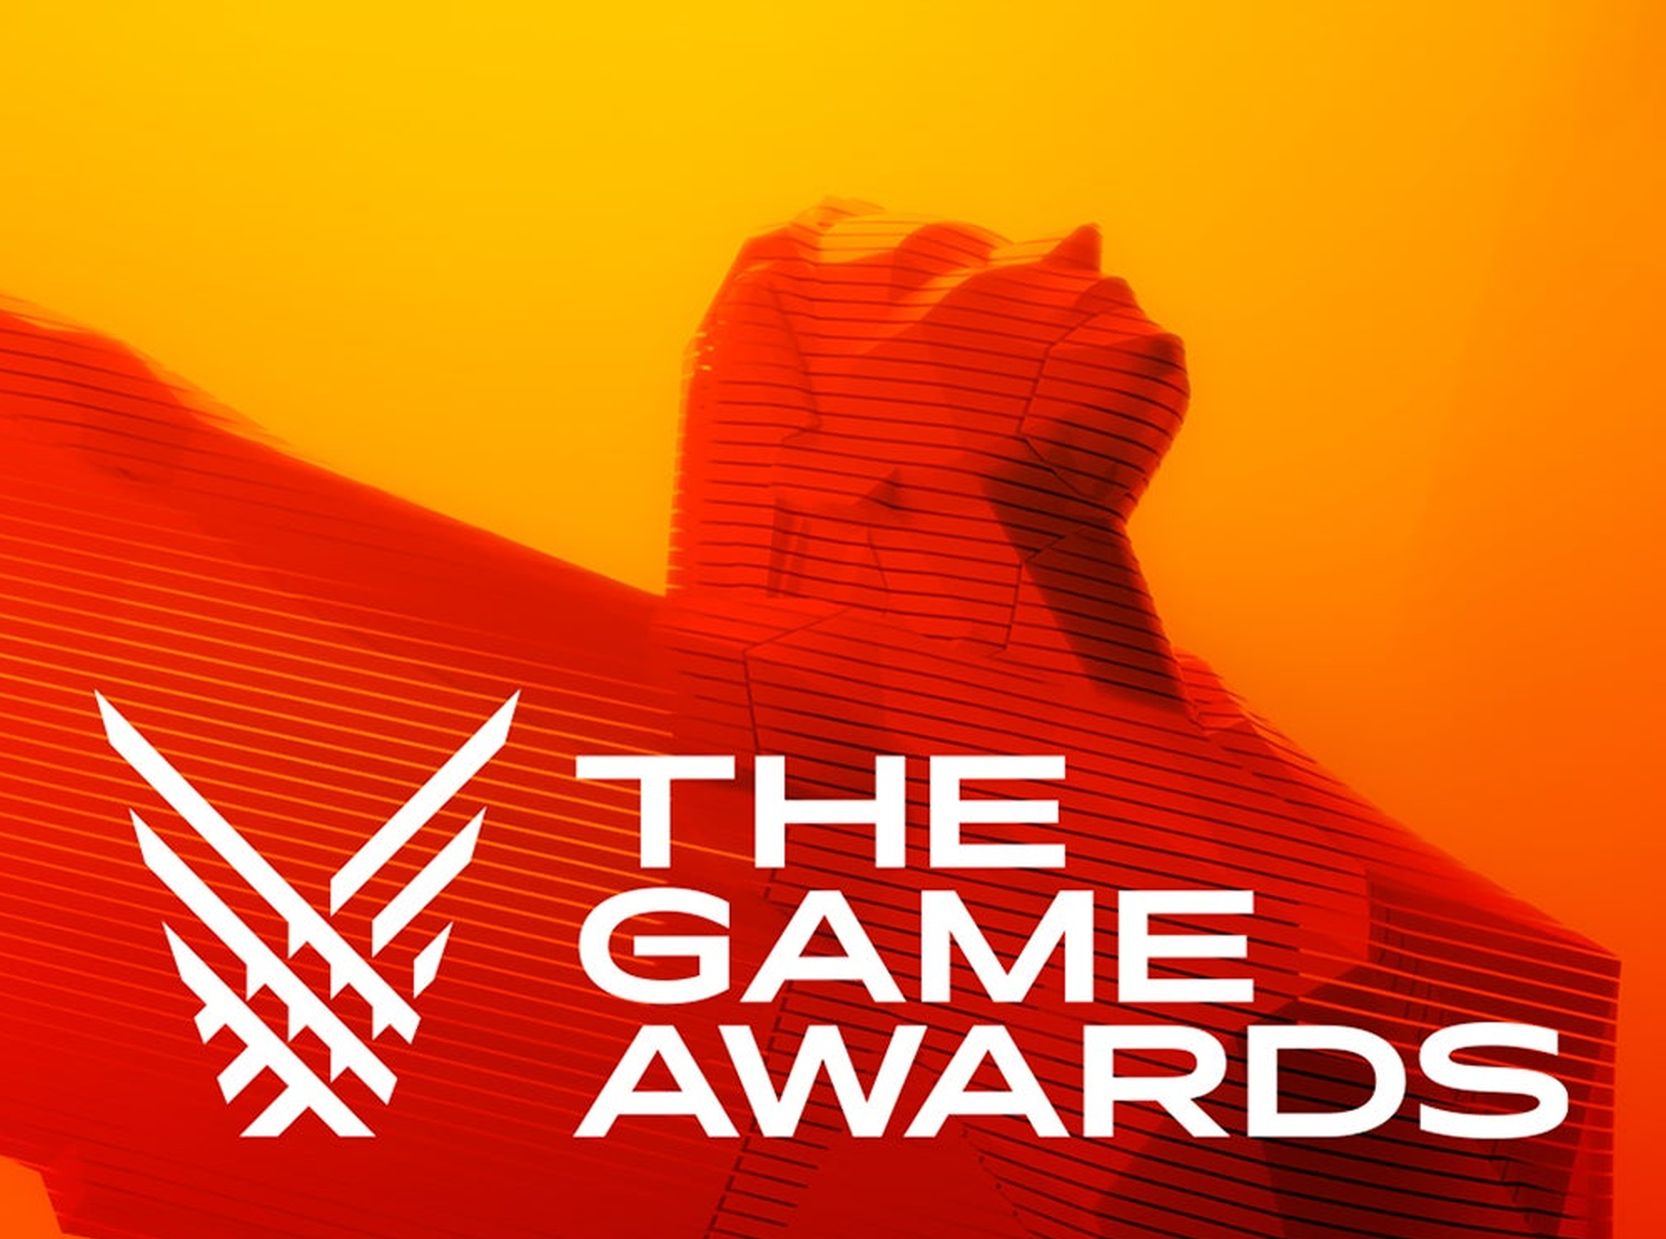 Image for The Game Awards 2022 tickets go on sale in November